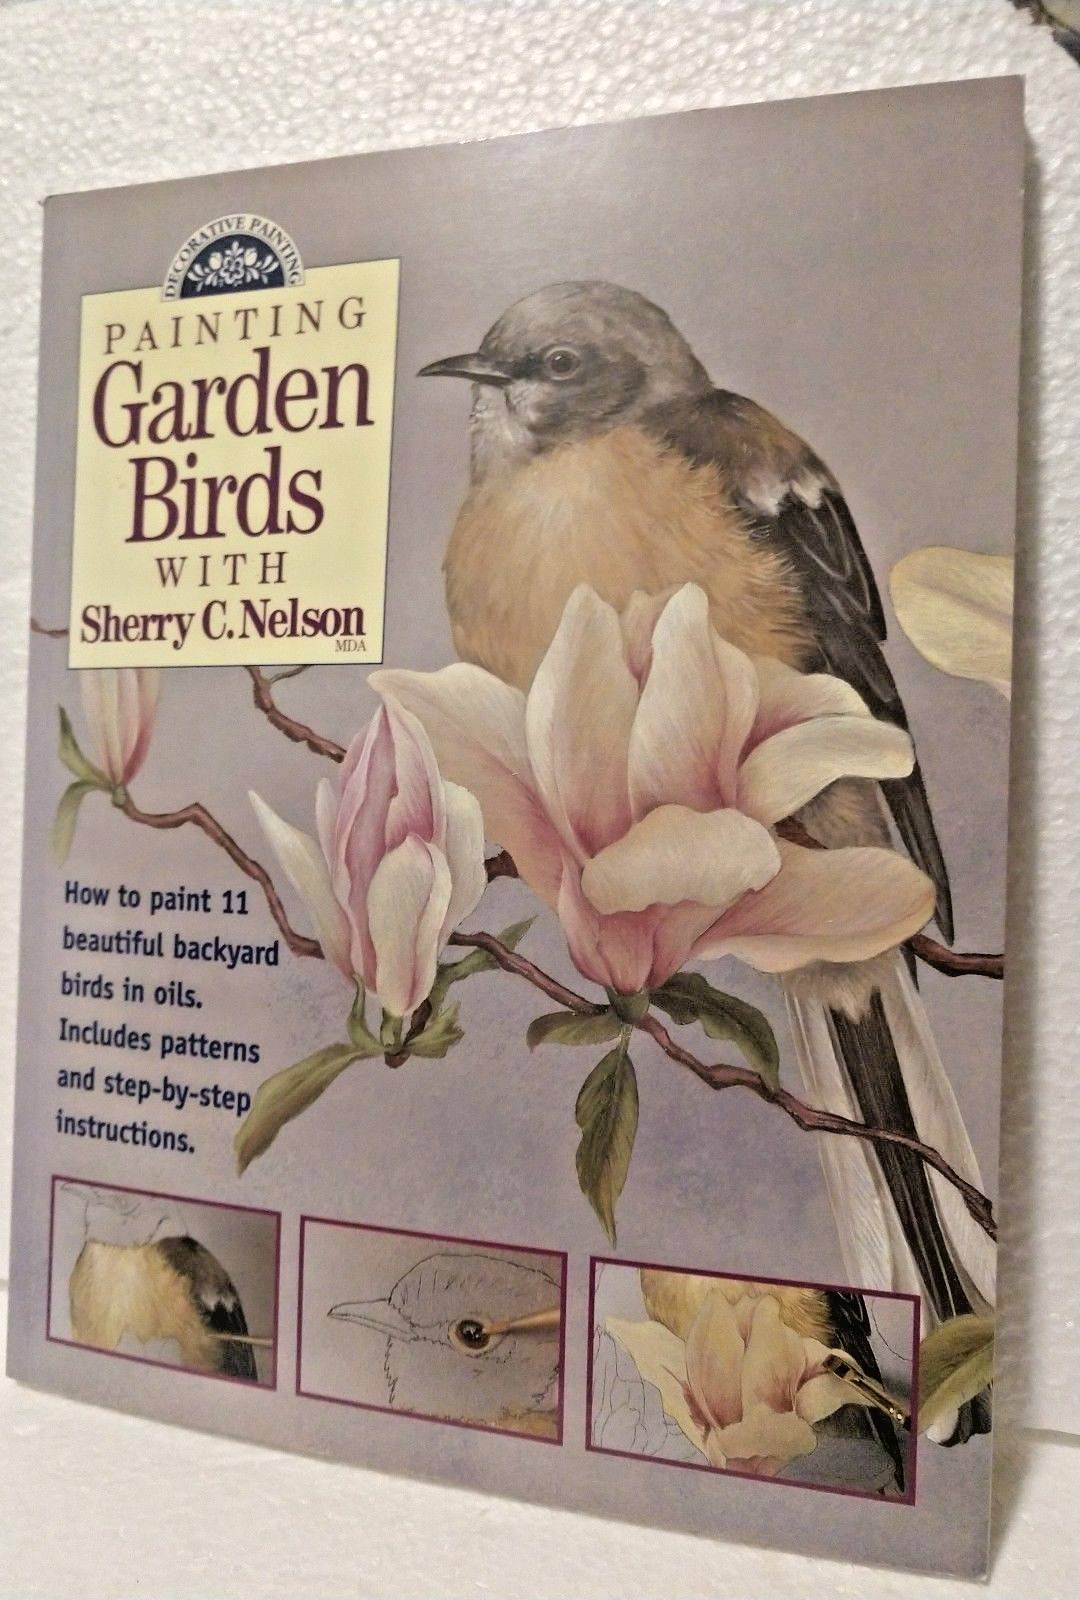 Painting Garden Birds with Sherry C. Nelson by Sherry C. Nelson (1998, Paperbac…